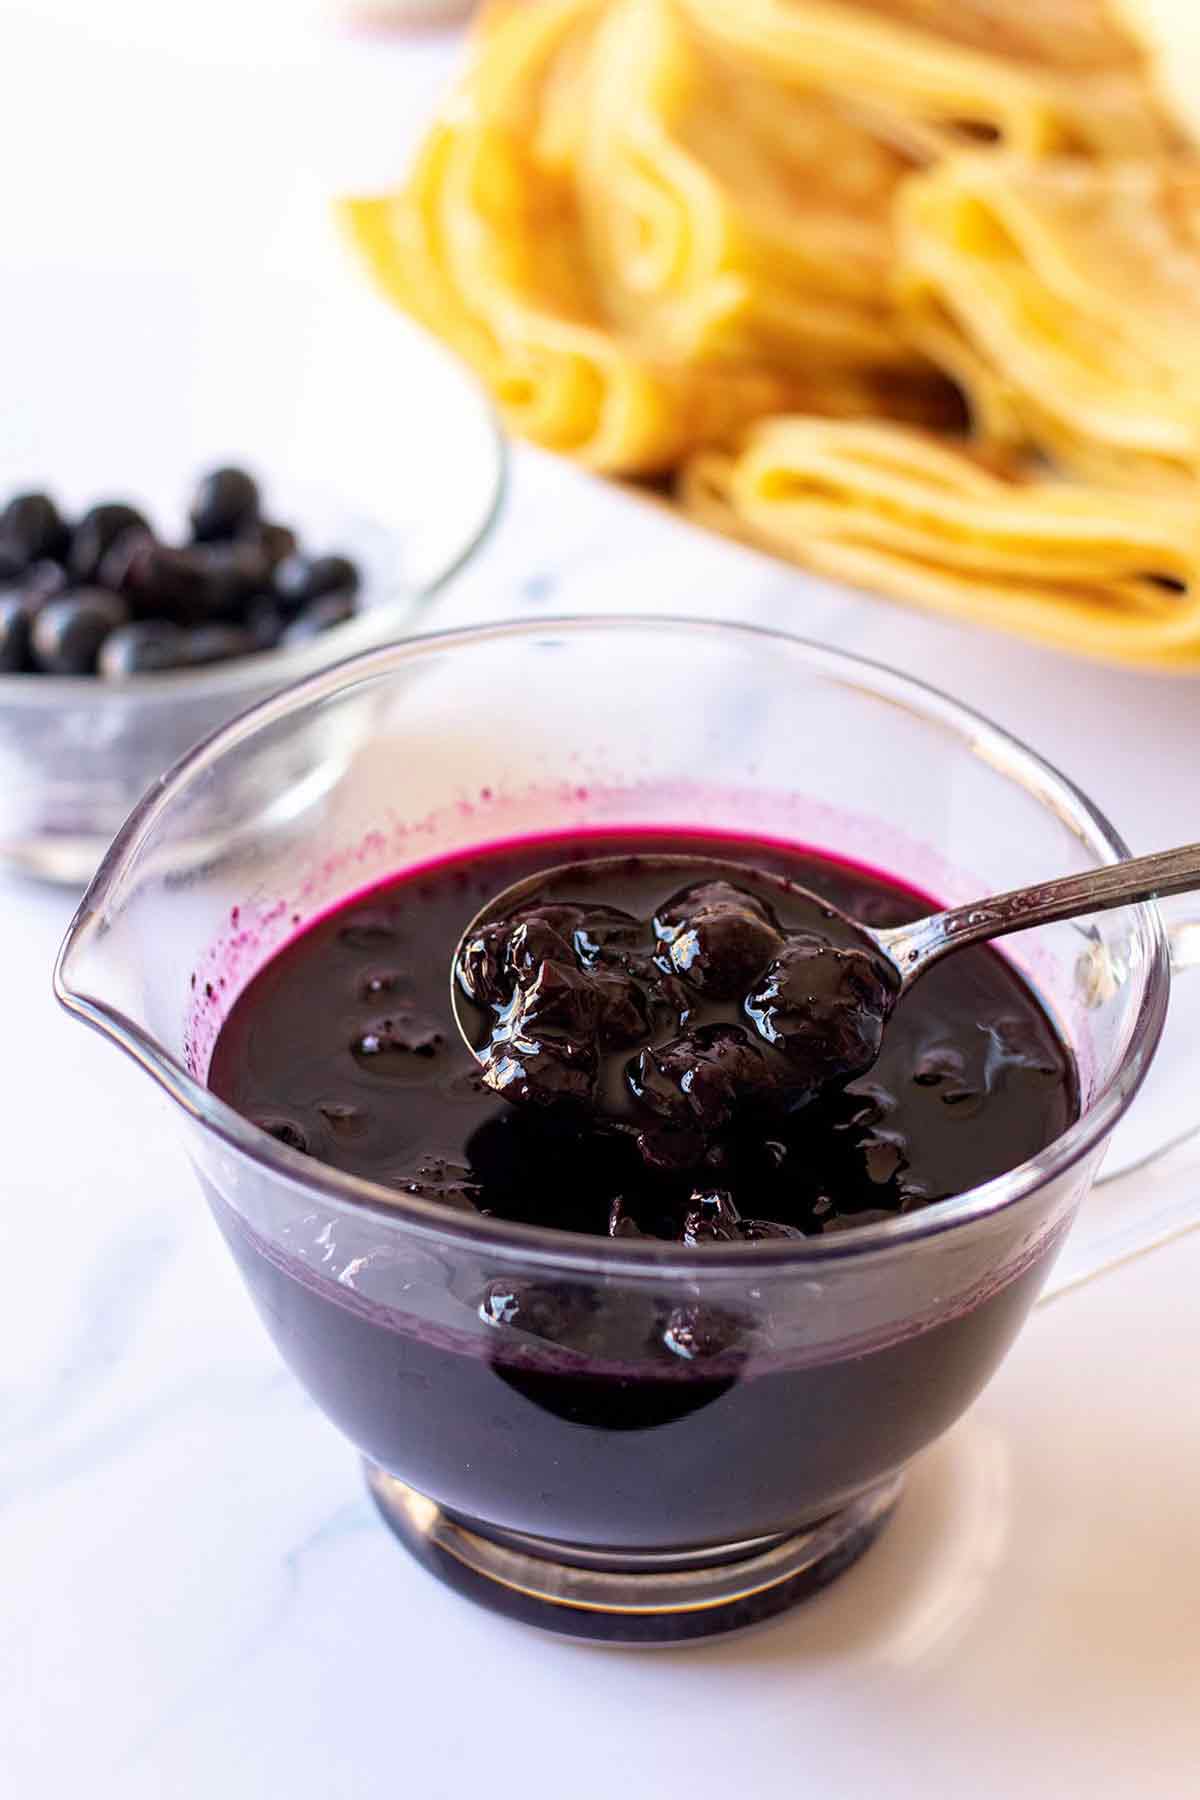 Homemade blueberry syrup in a small glass pitcher with spoon